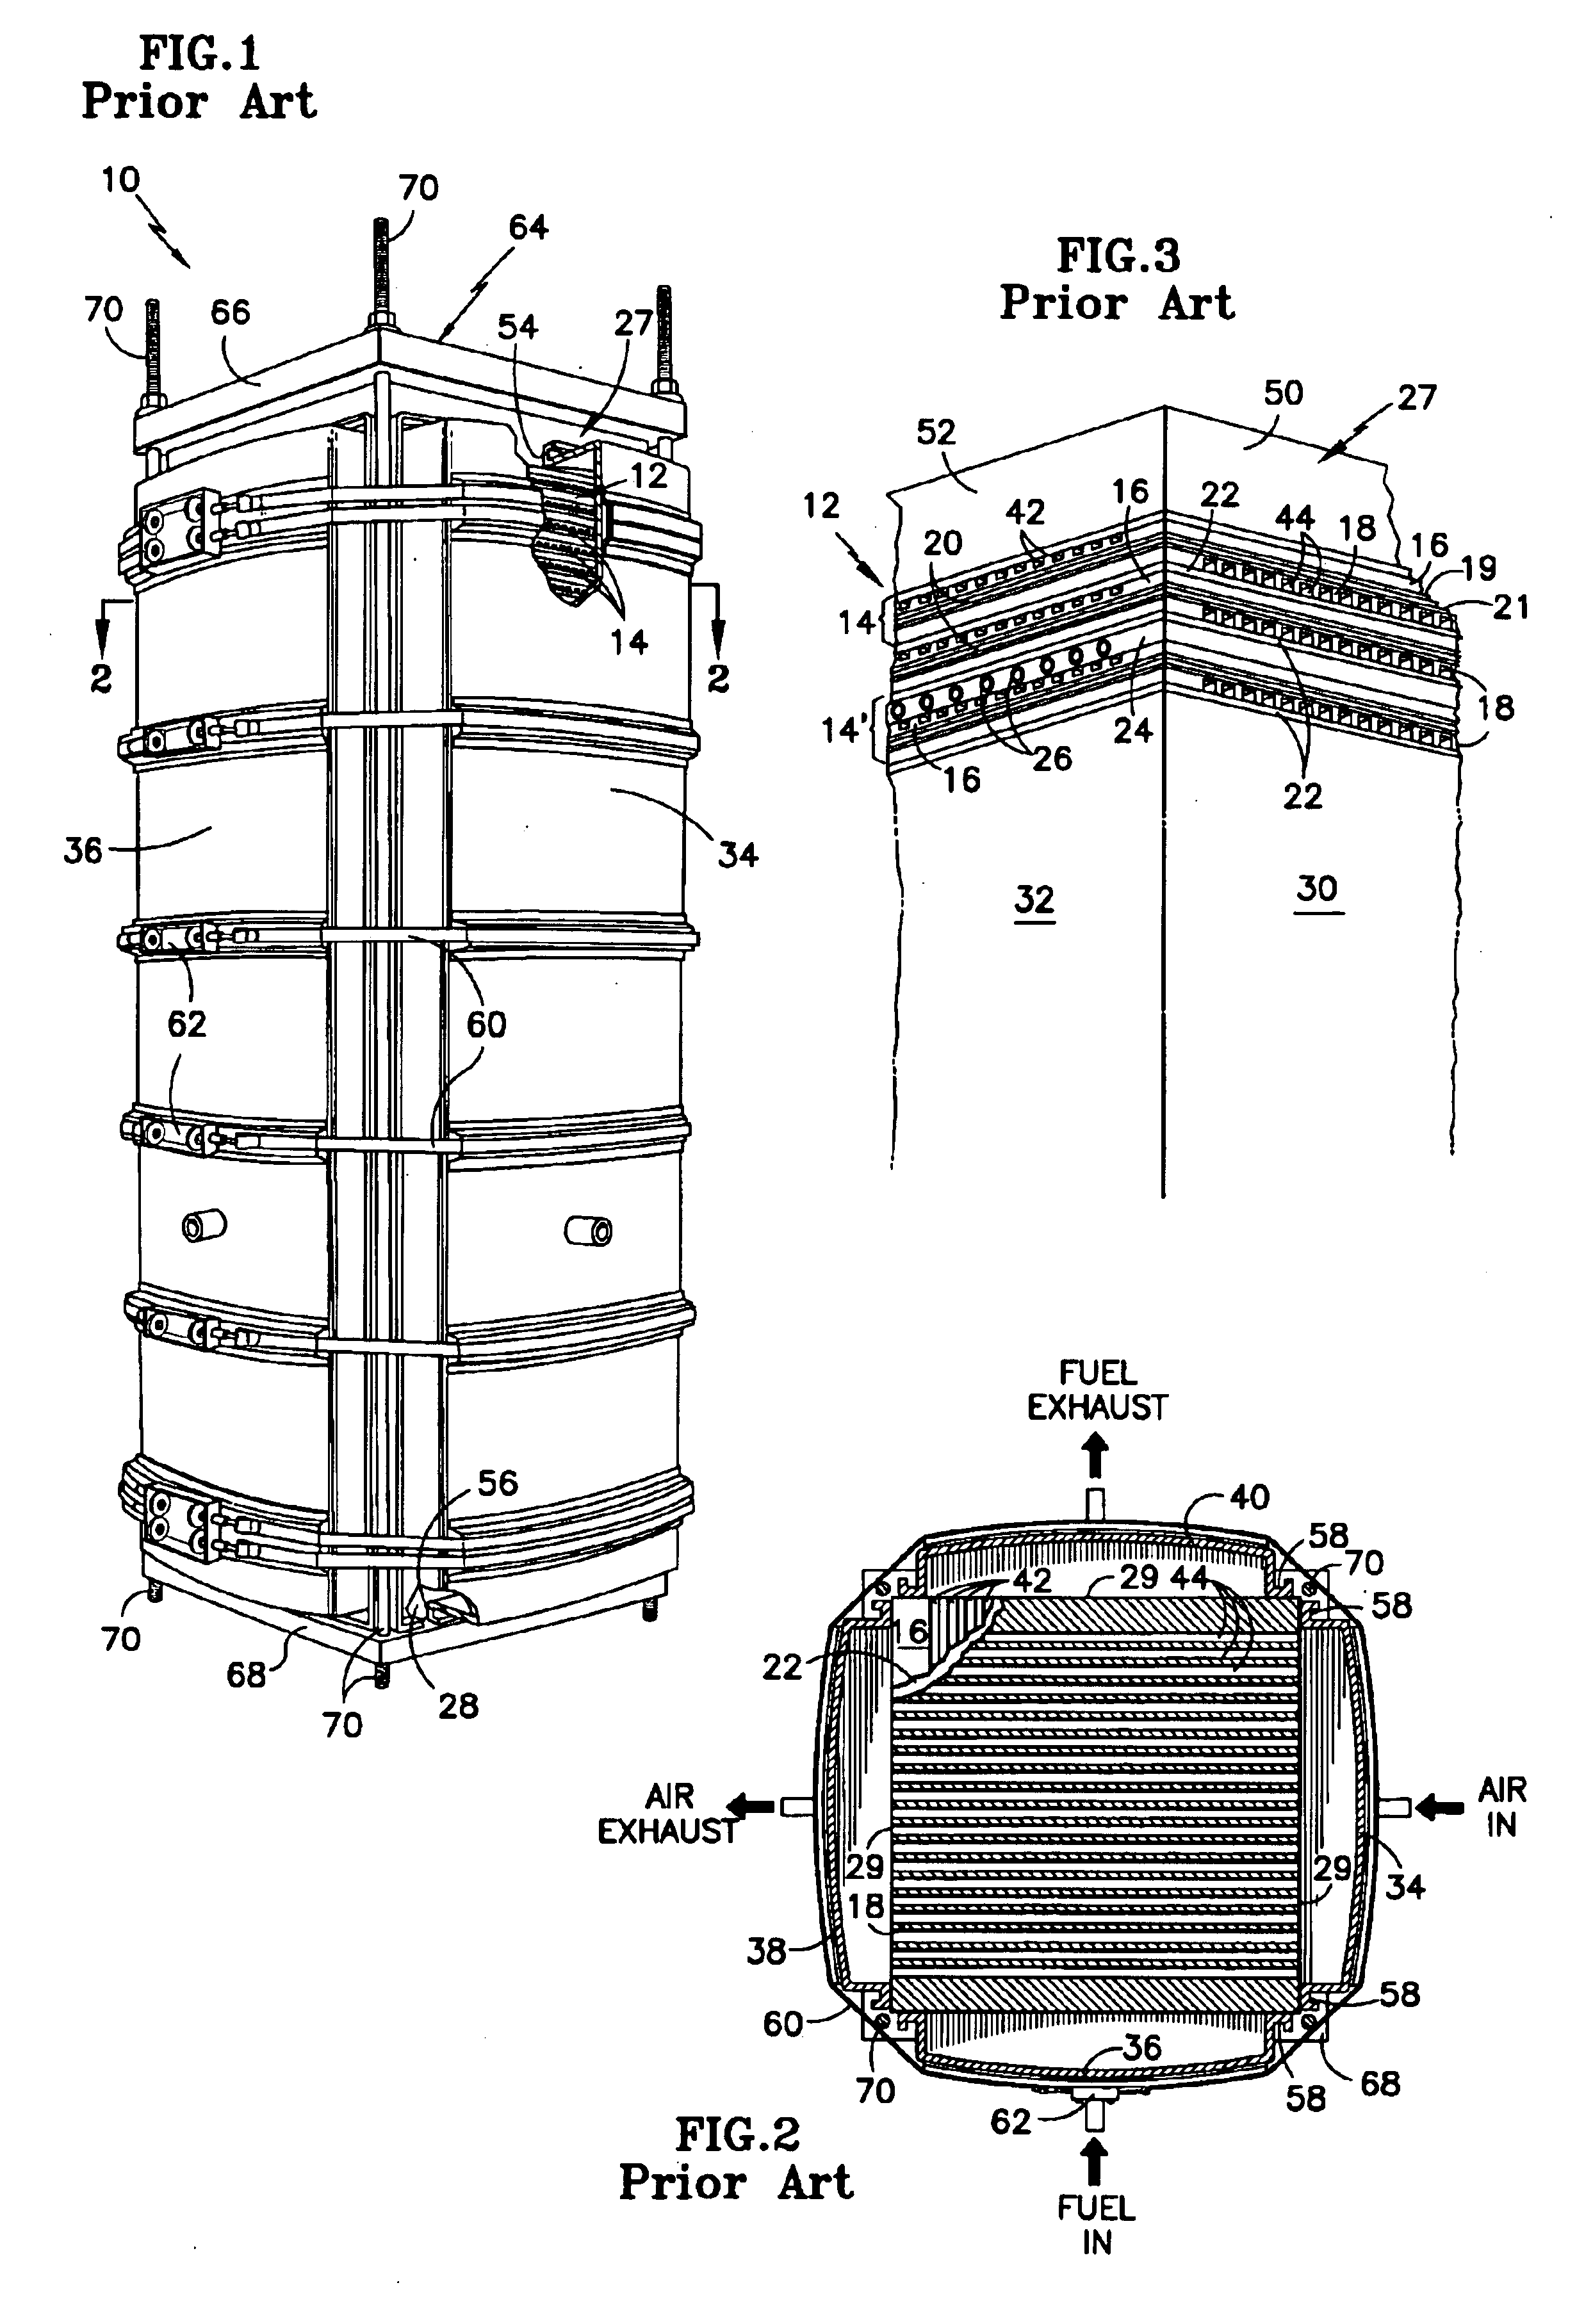 One piece sleeve gas manifold for cell stack assemblies such as fuel cells